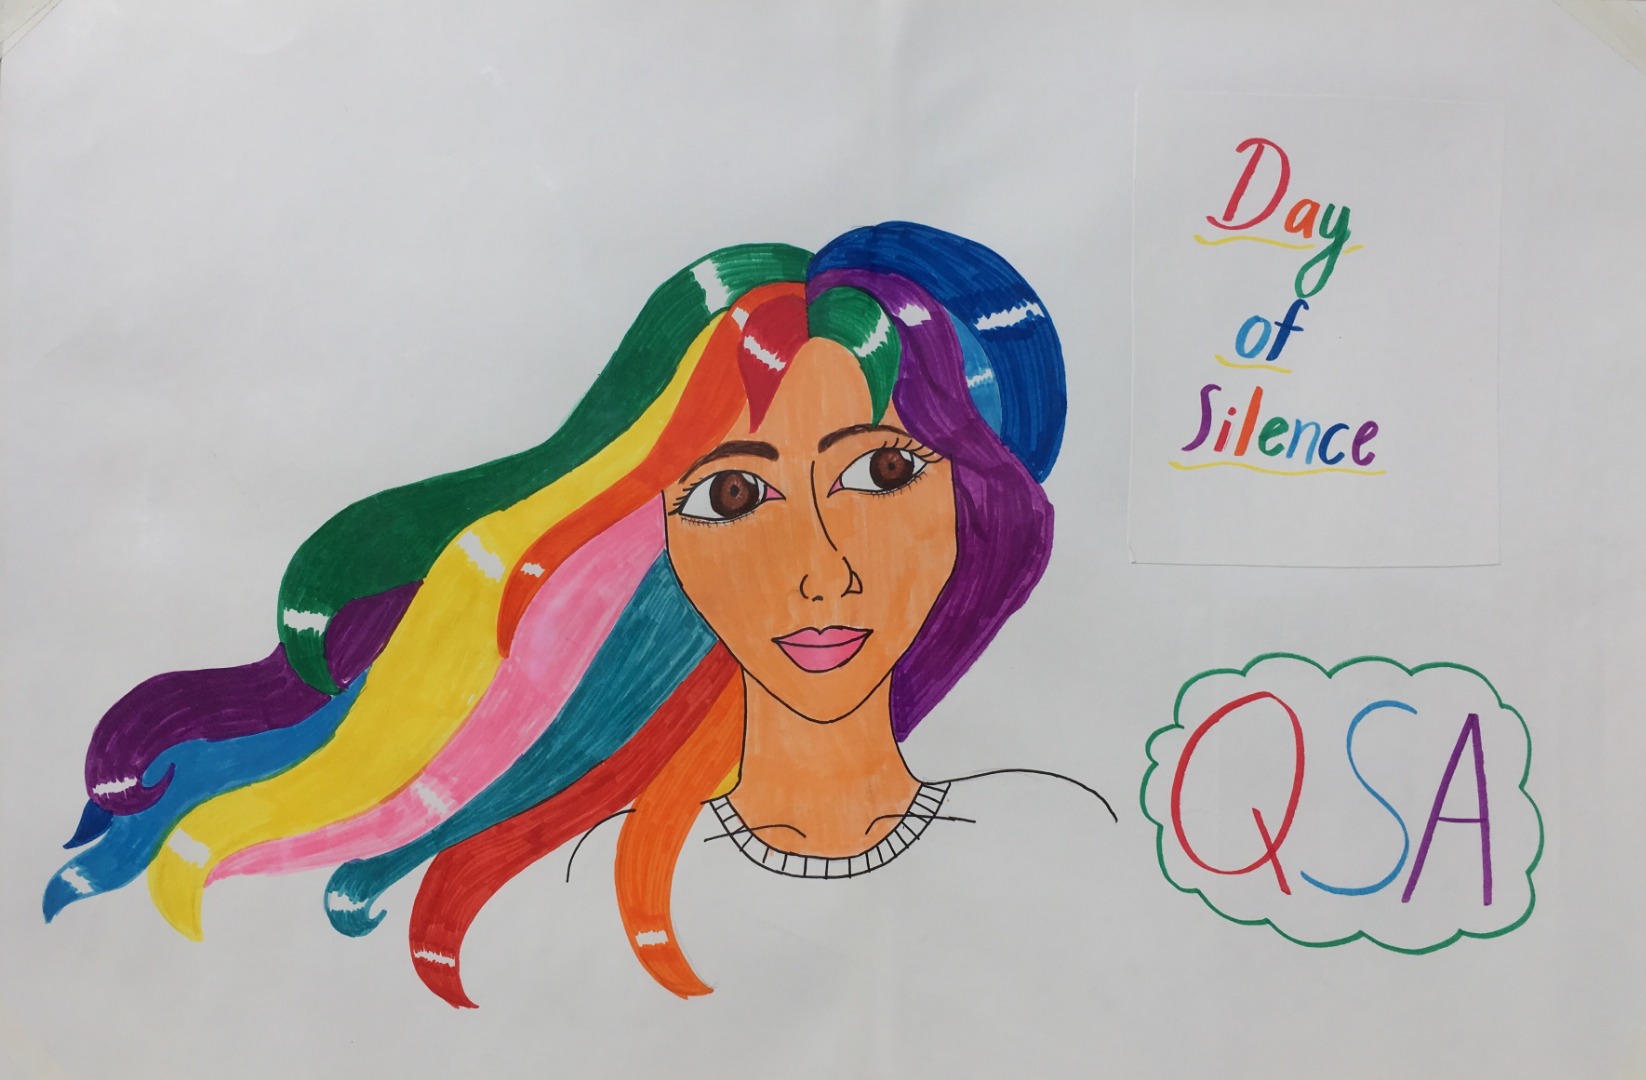 Student artwork of a woman with rainbow hair 